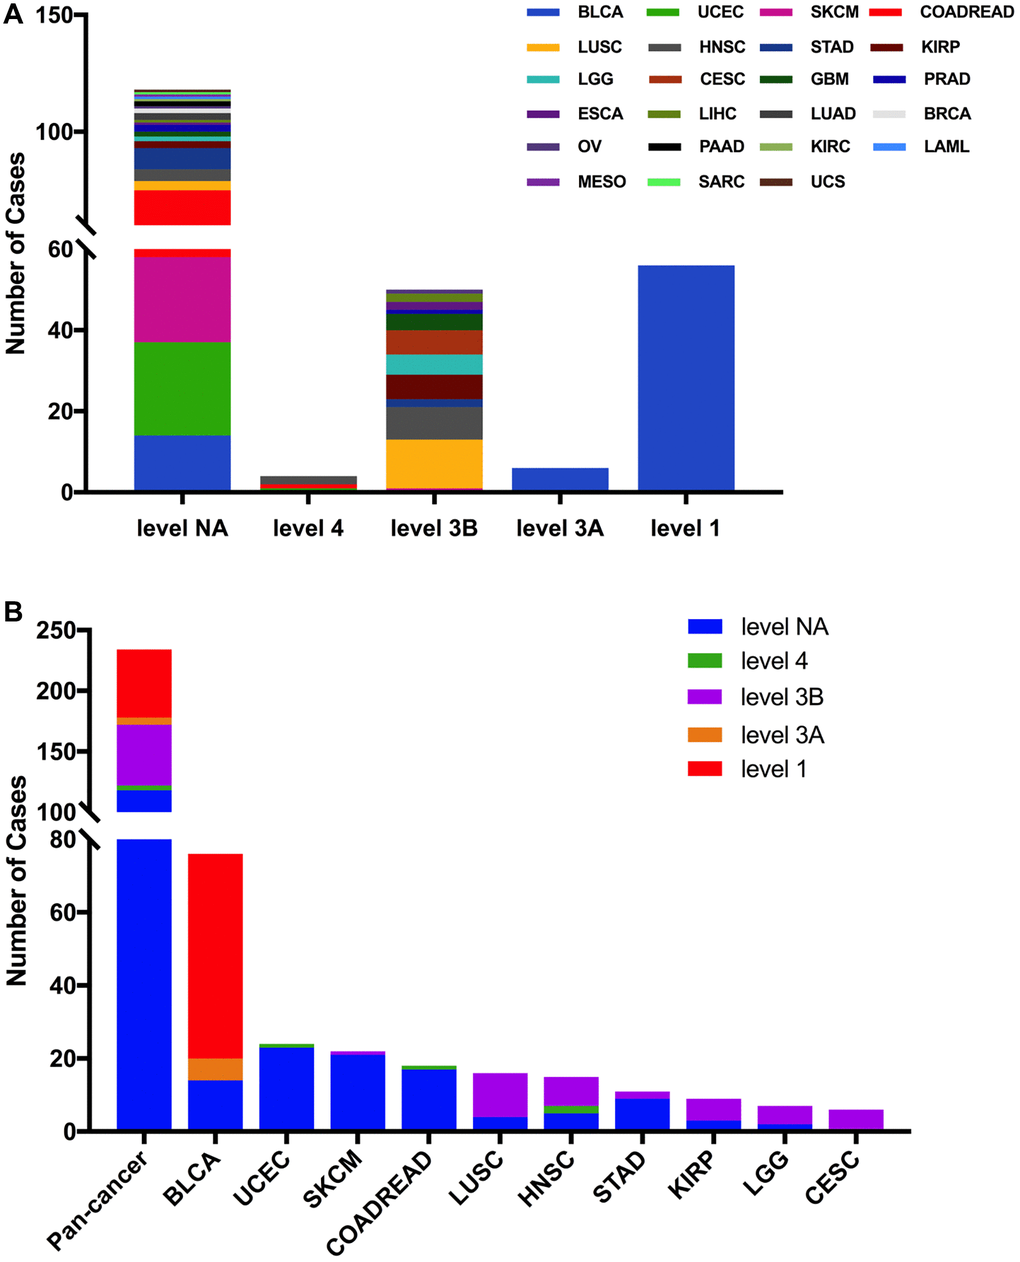 FGFR3 mutation classification according to clinical therapeutic implications. (A) FGFR3 mutations were classified according to the therapeutic implications defined by OncoKB among all tumors together. (B) Therapeutic implications class distribution of FGFR3 mutations in pan-cancer and the top ten tumor types.